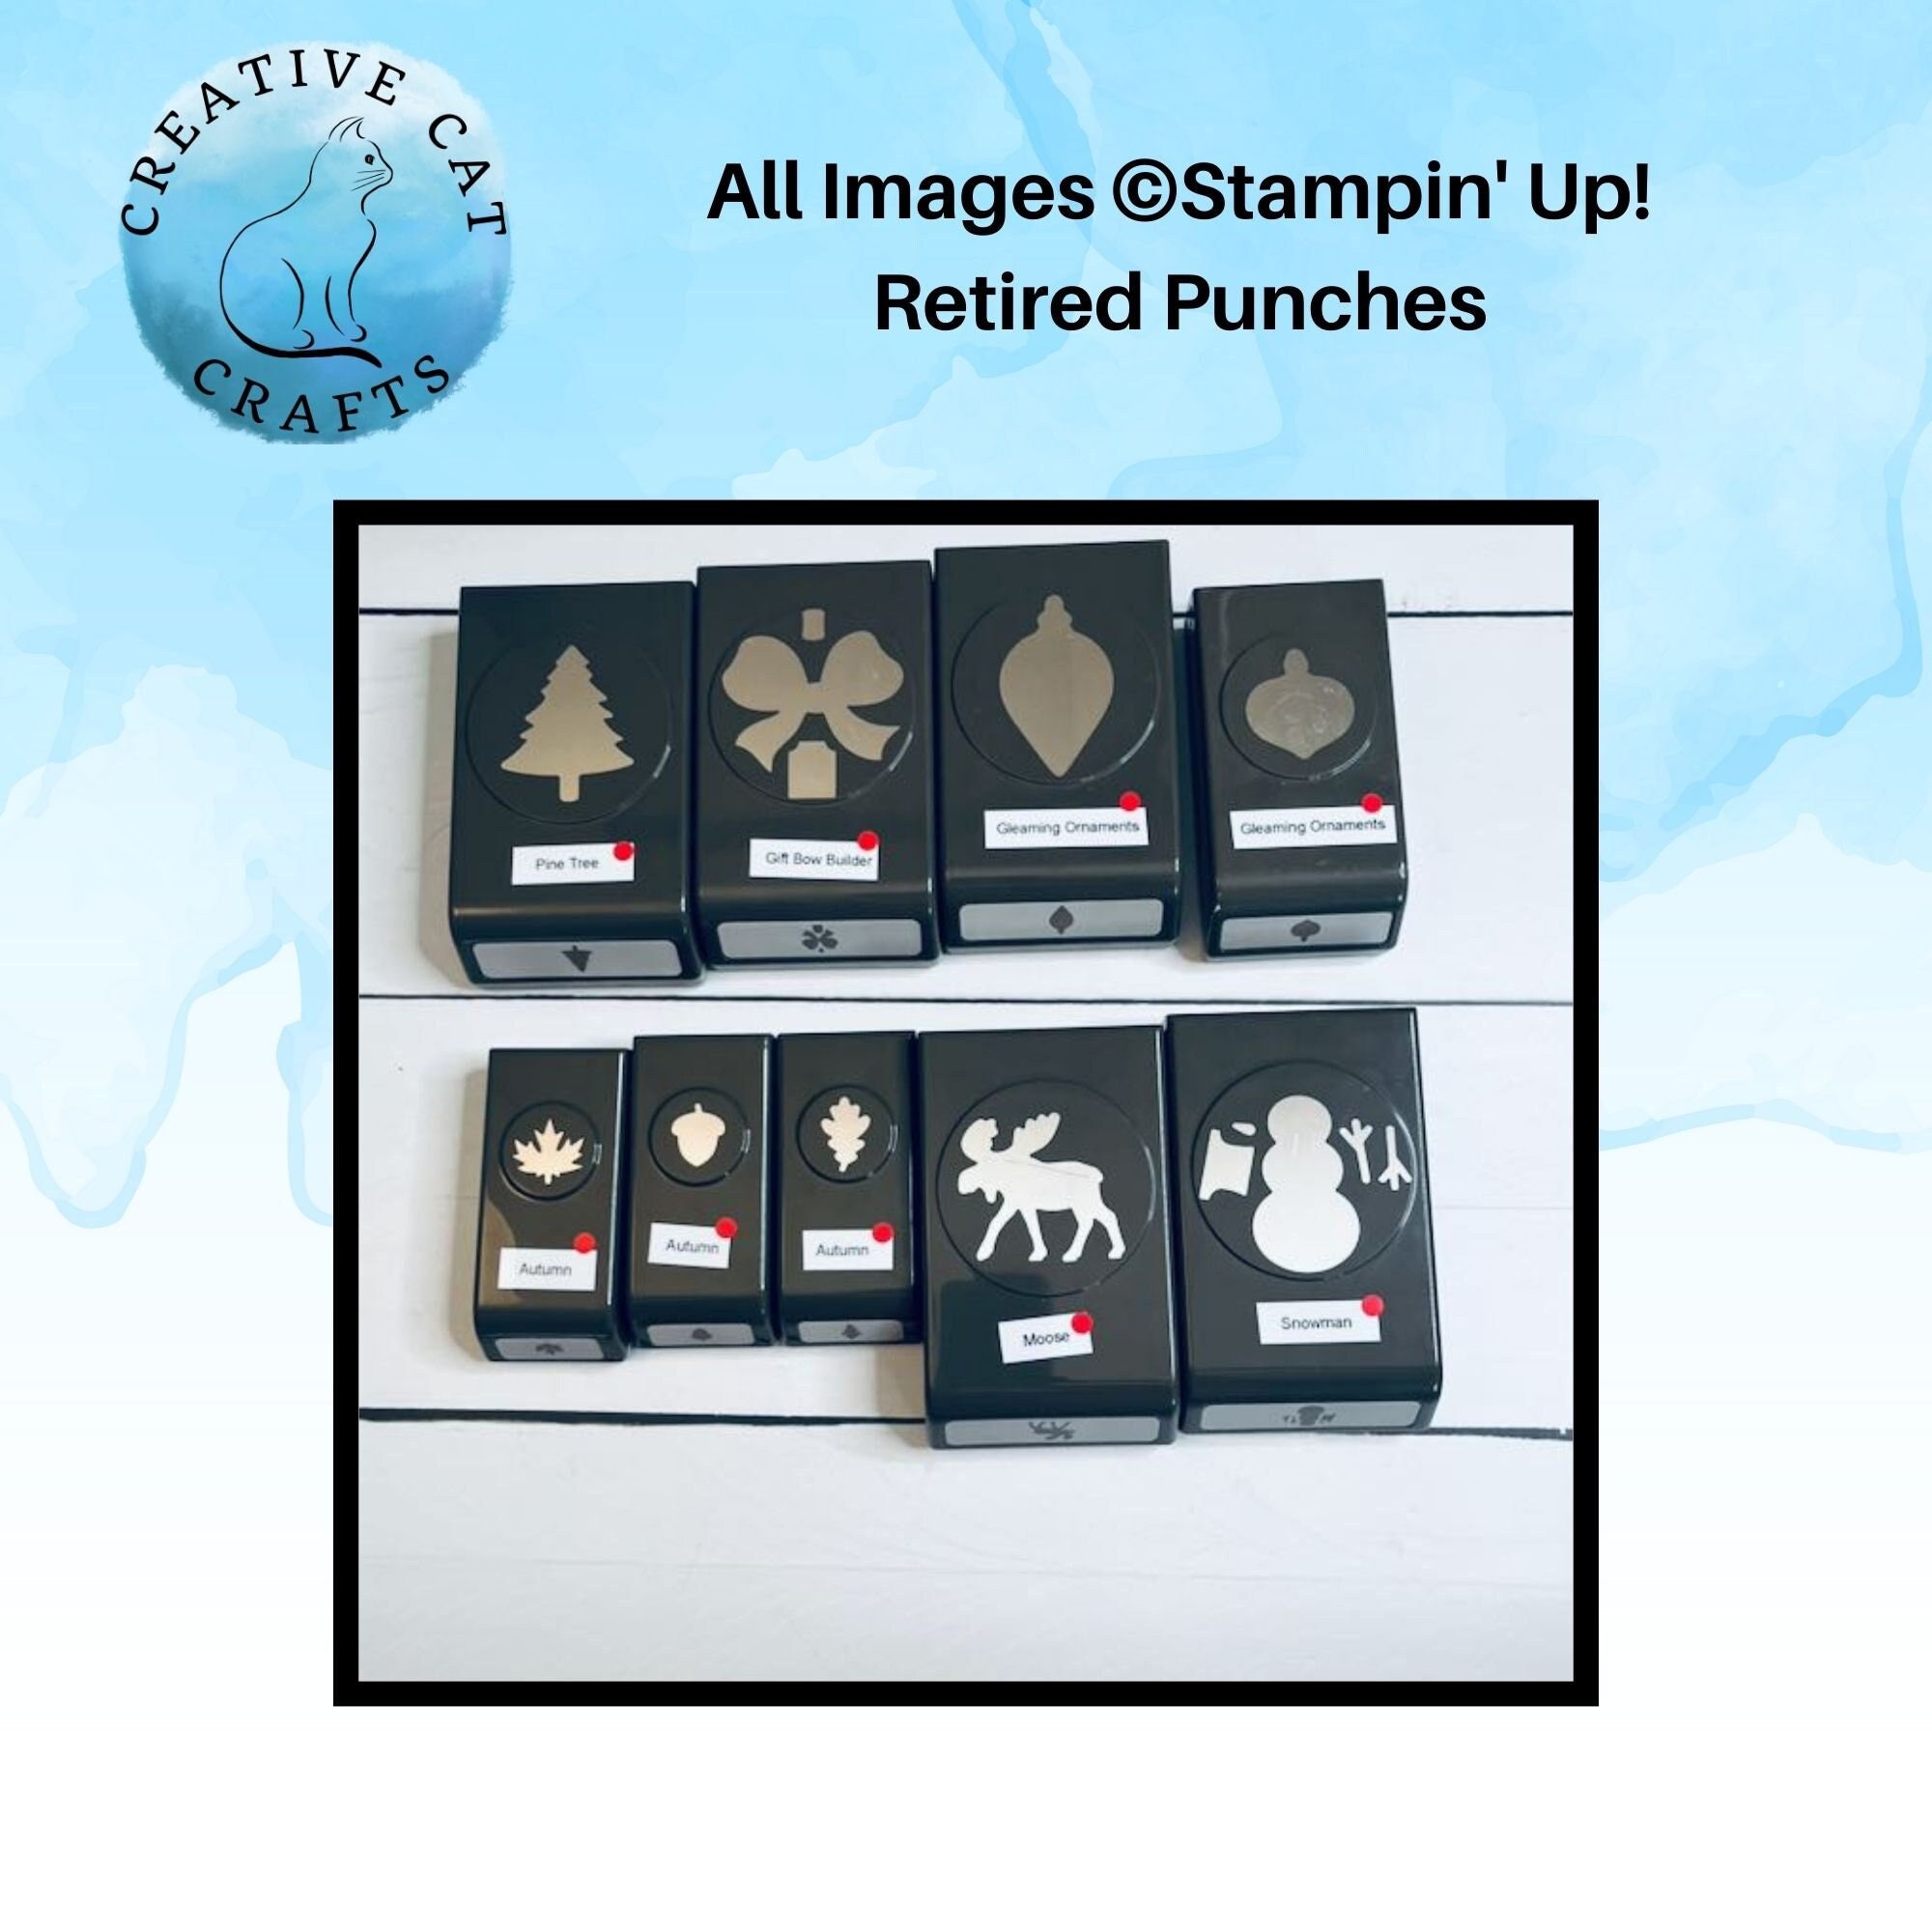 Stampin' up Classic Cardstock 20 or 24 Pack, 8.5x11, 80 Lb. Weight, New in  Original Package, Retired Colors You Choose 